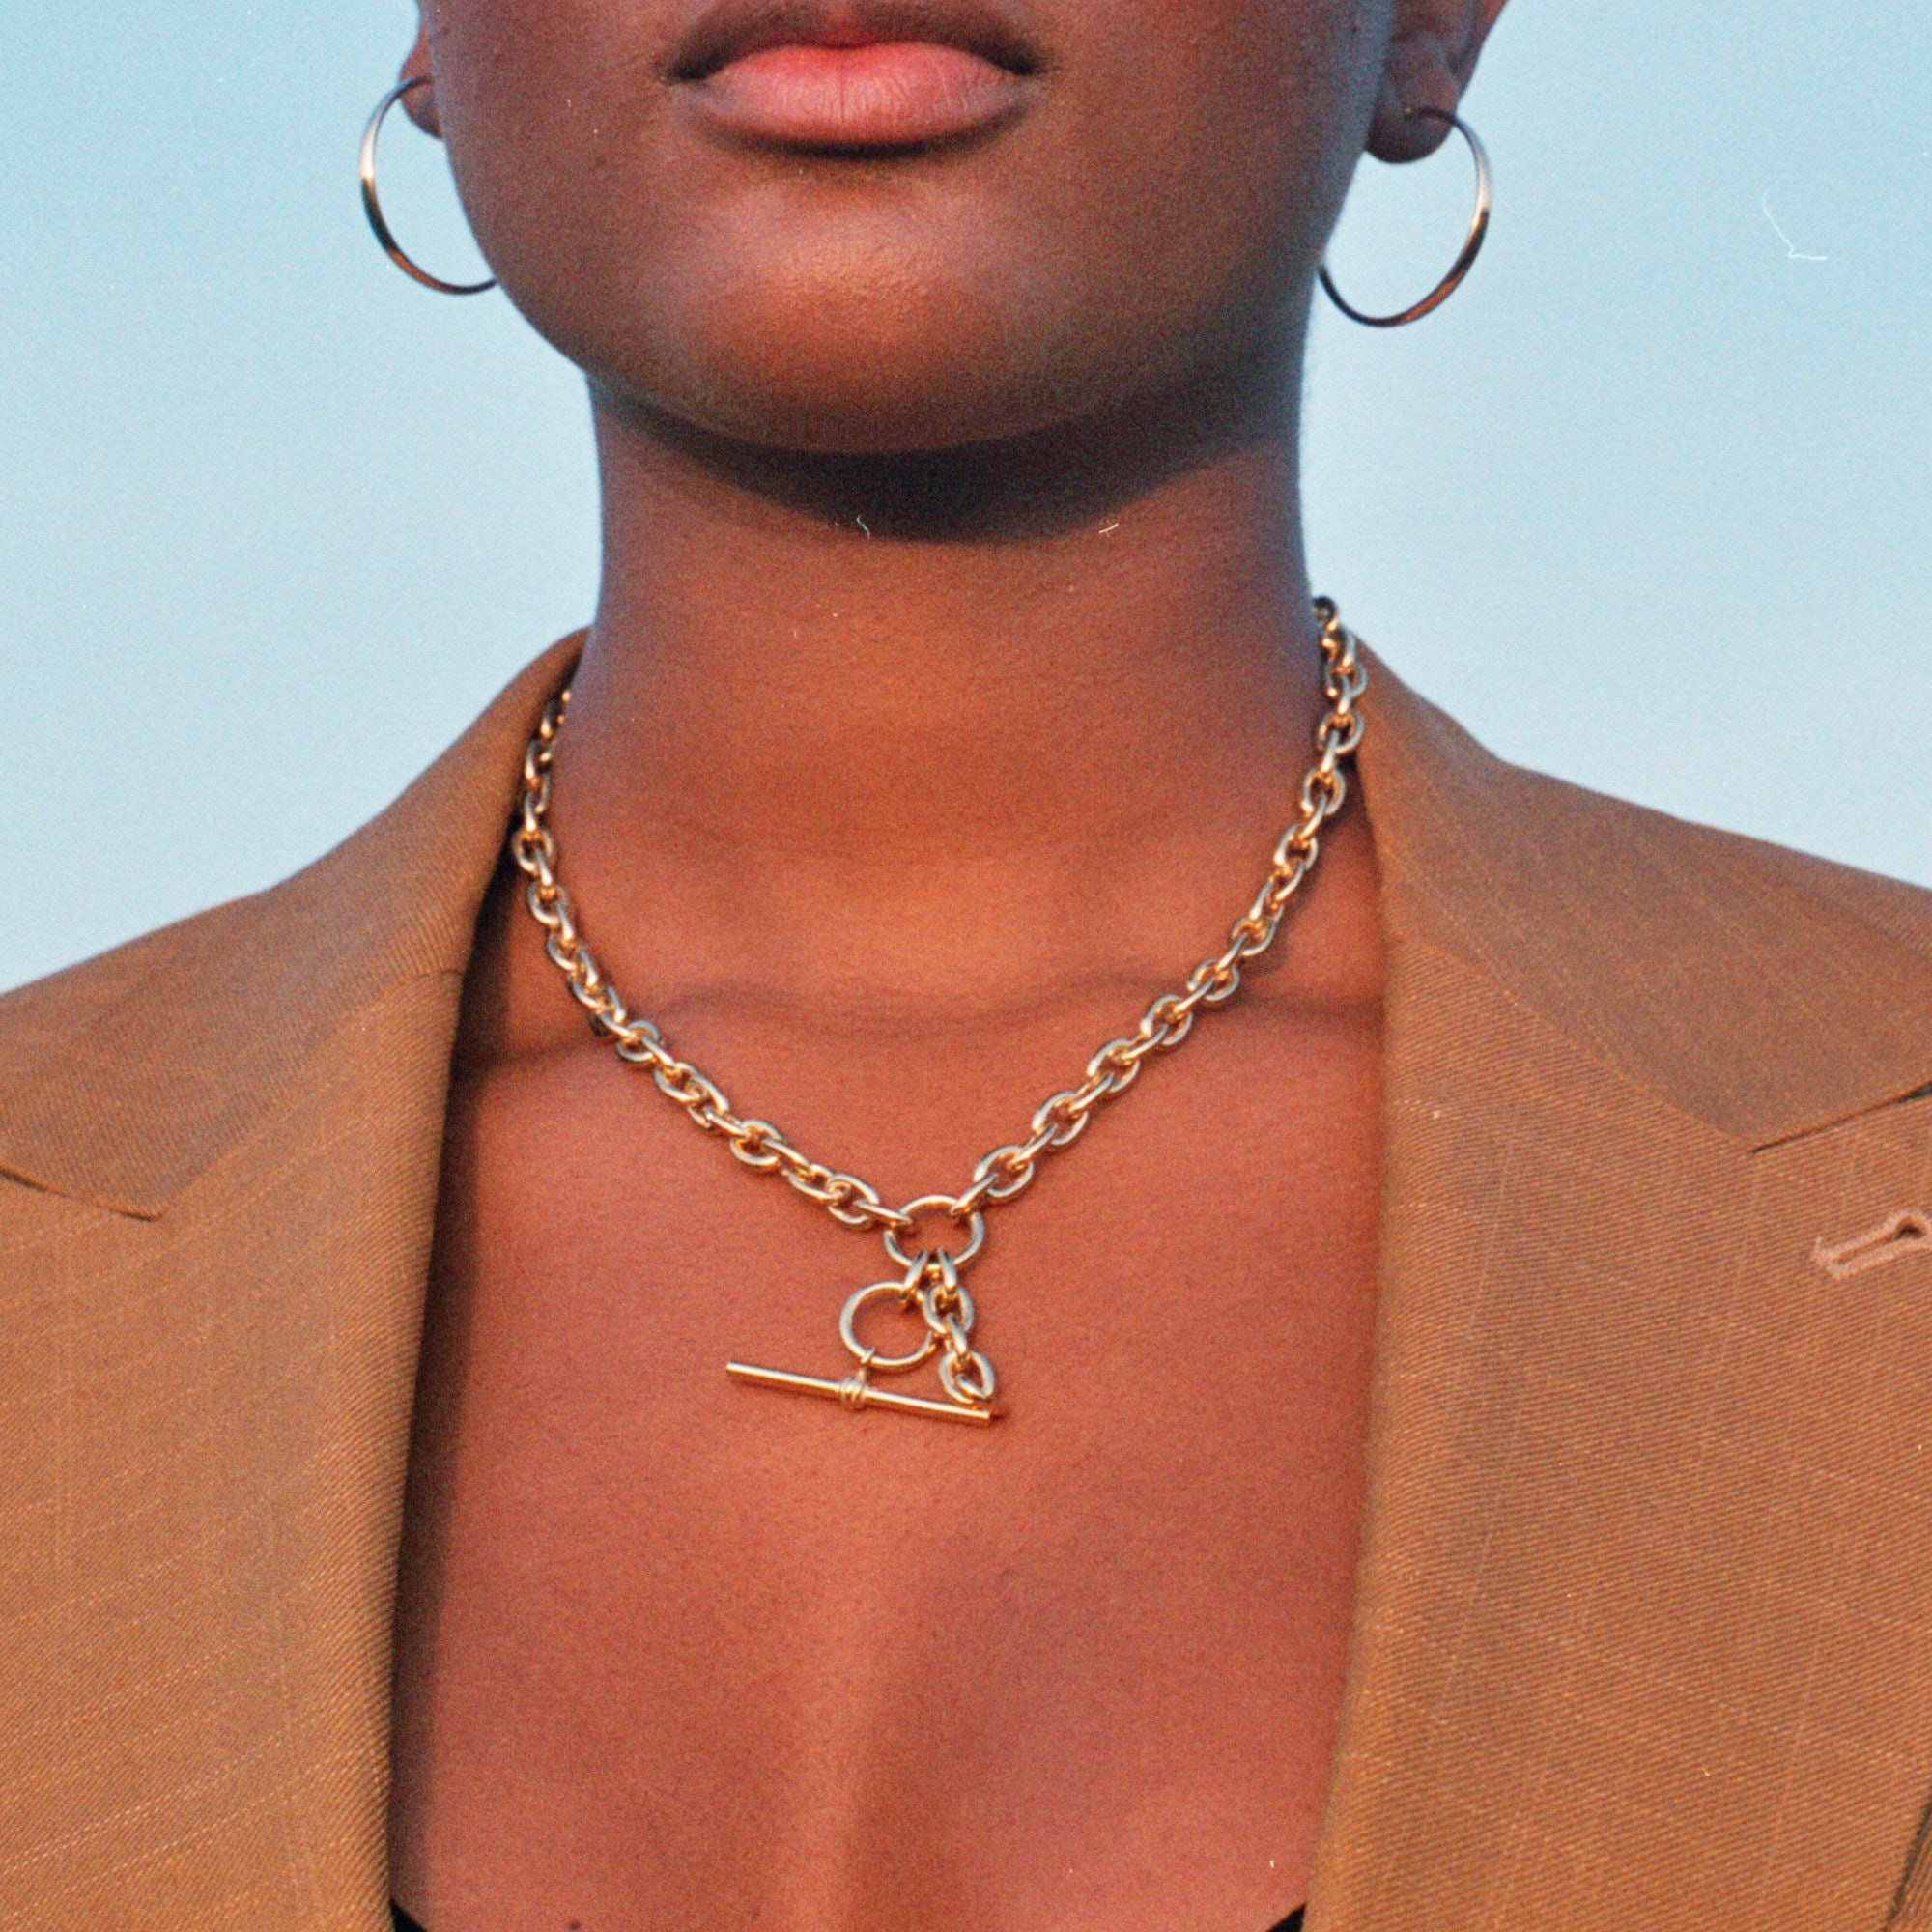 Rolo Chain Toggle Bar Necklace in Worn Gold. - Front Toggle Bar Clasp  Closure - Approximately 15